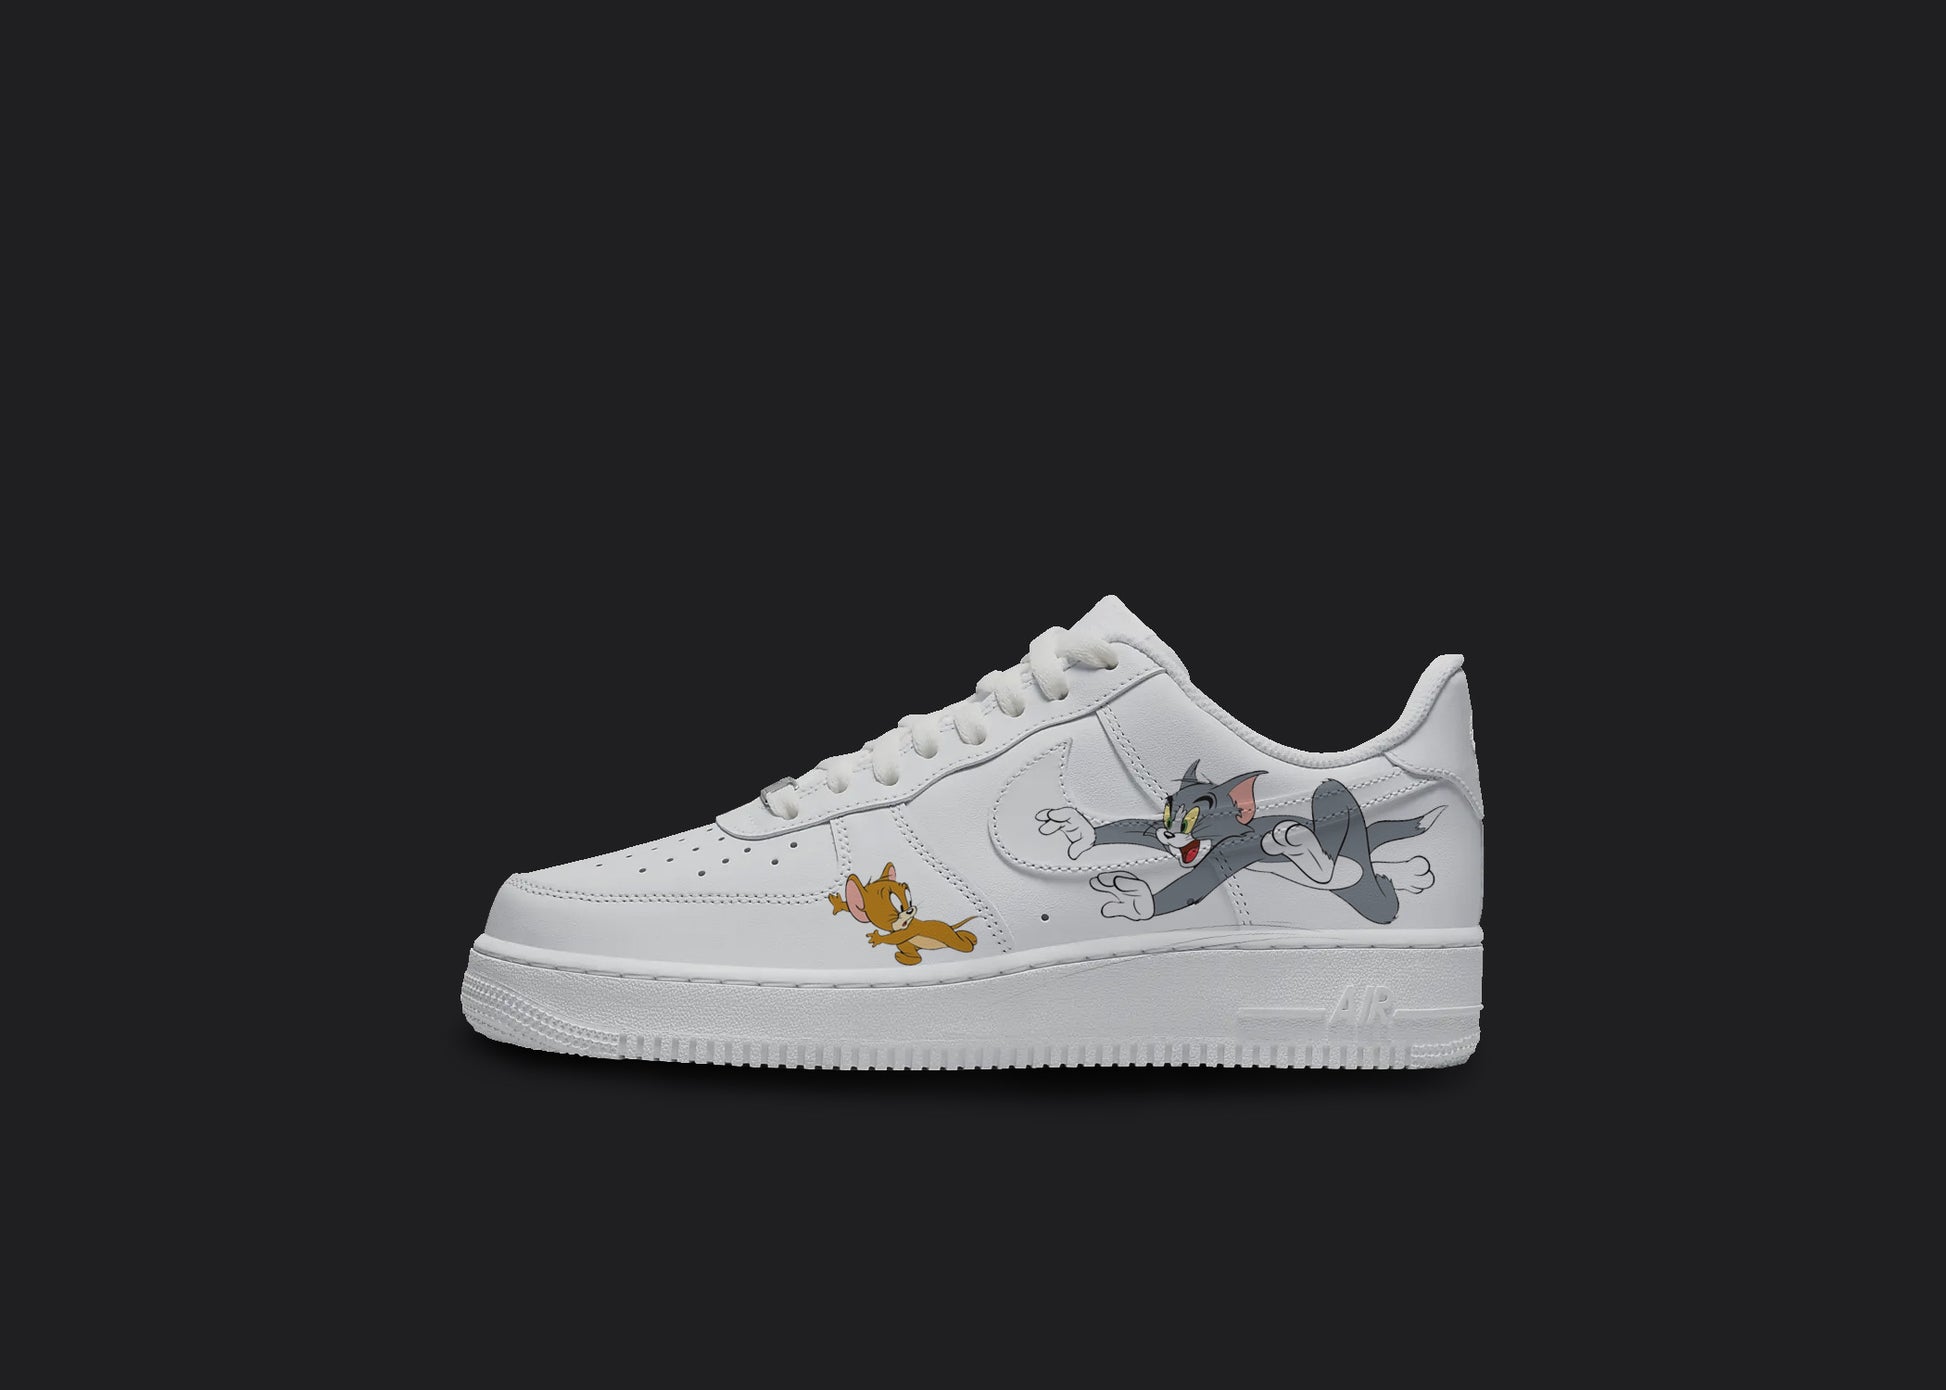  The image is of a Custom Nike Air force 1 shoes on a blank black background. The white custom nike shoe has a tom and jerry design on the side.  